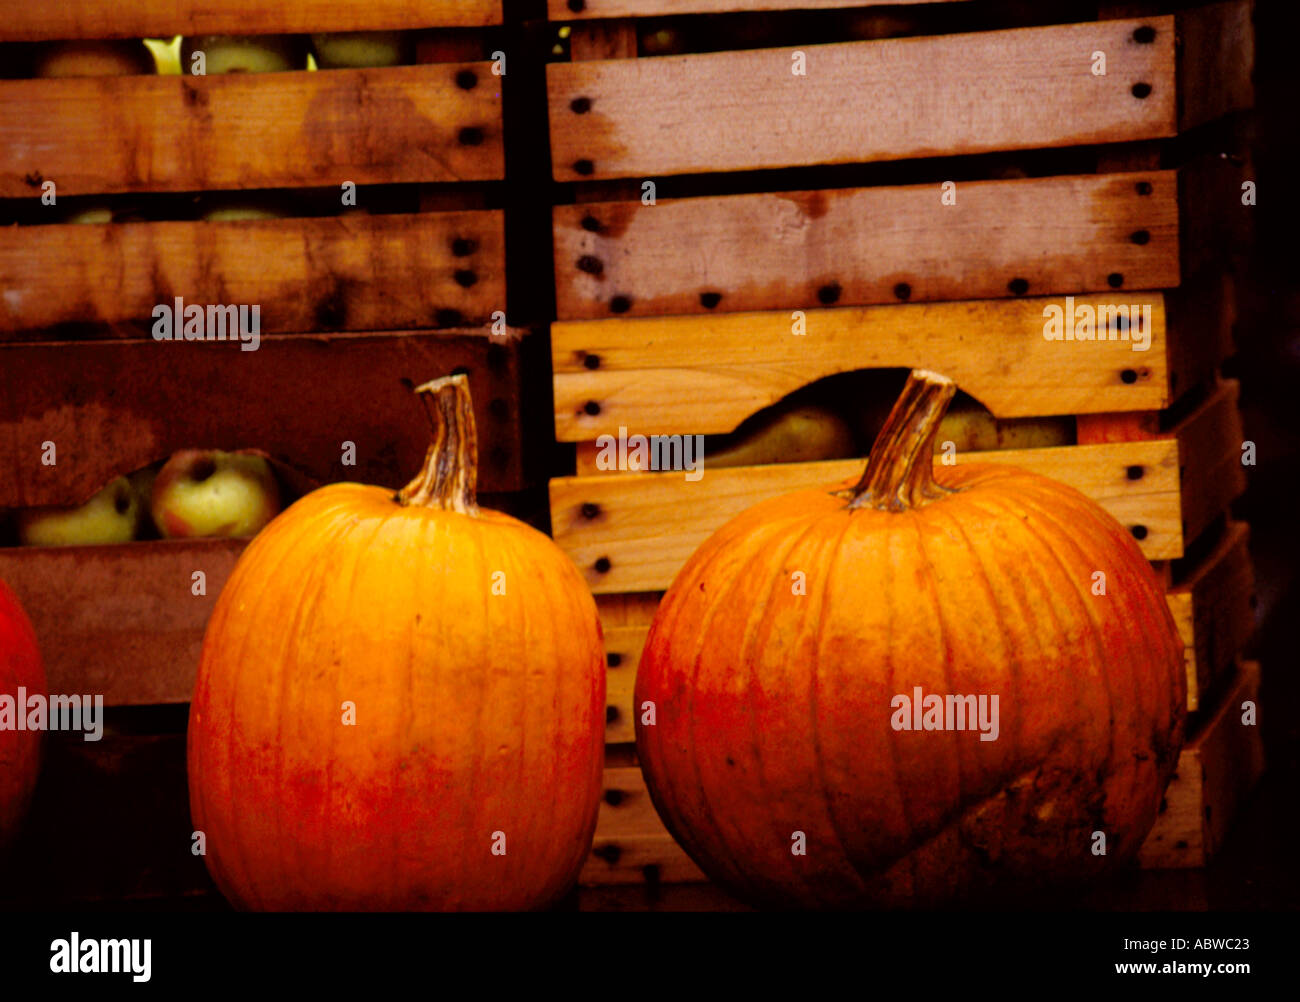 Pumpkins sit in front of crates of apples Stock Photo